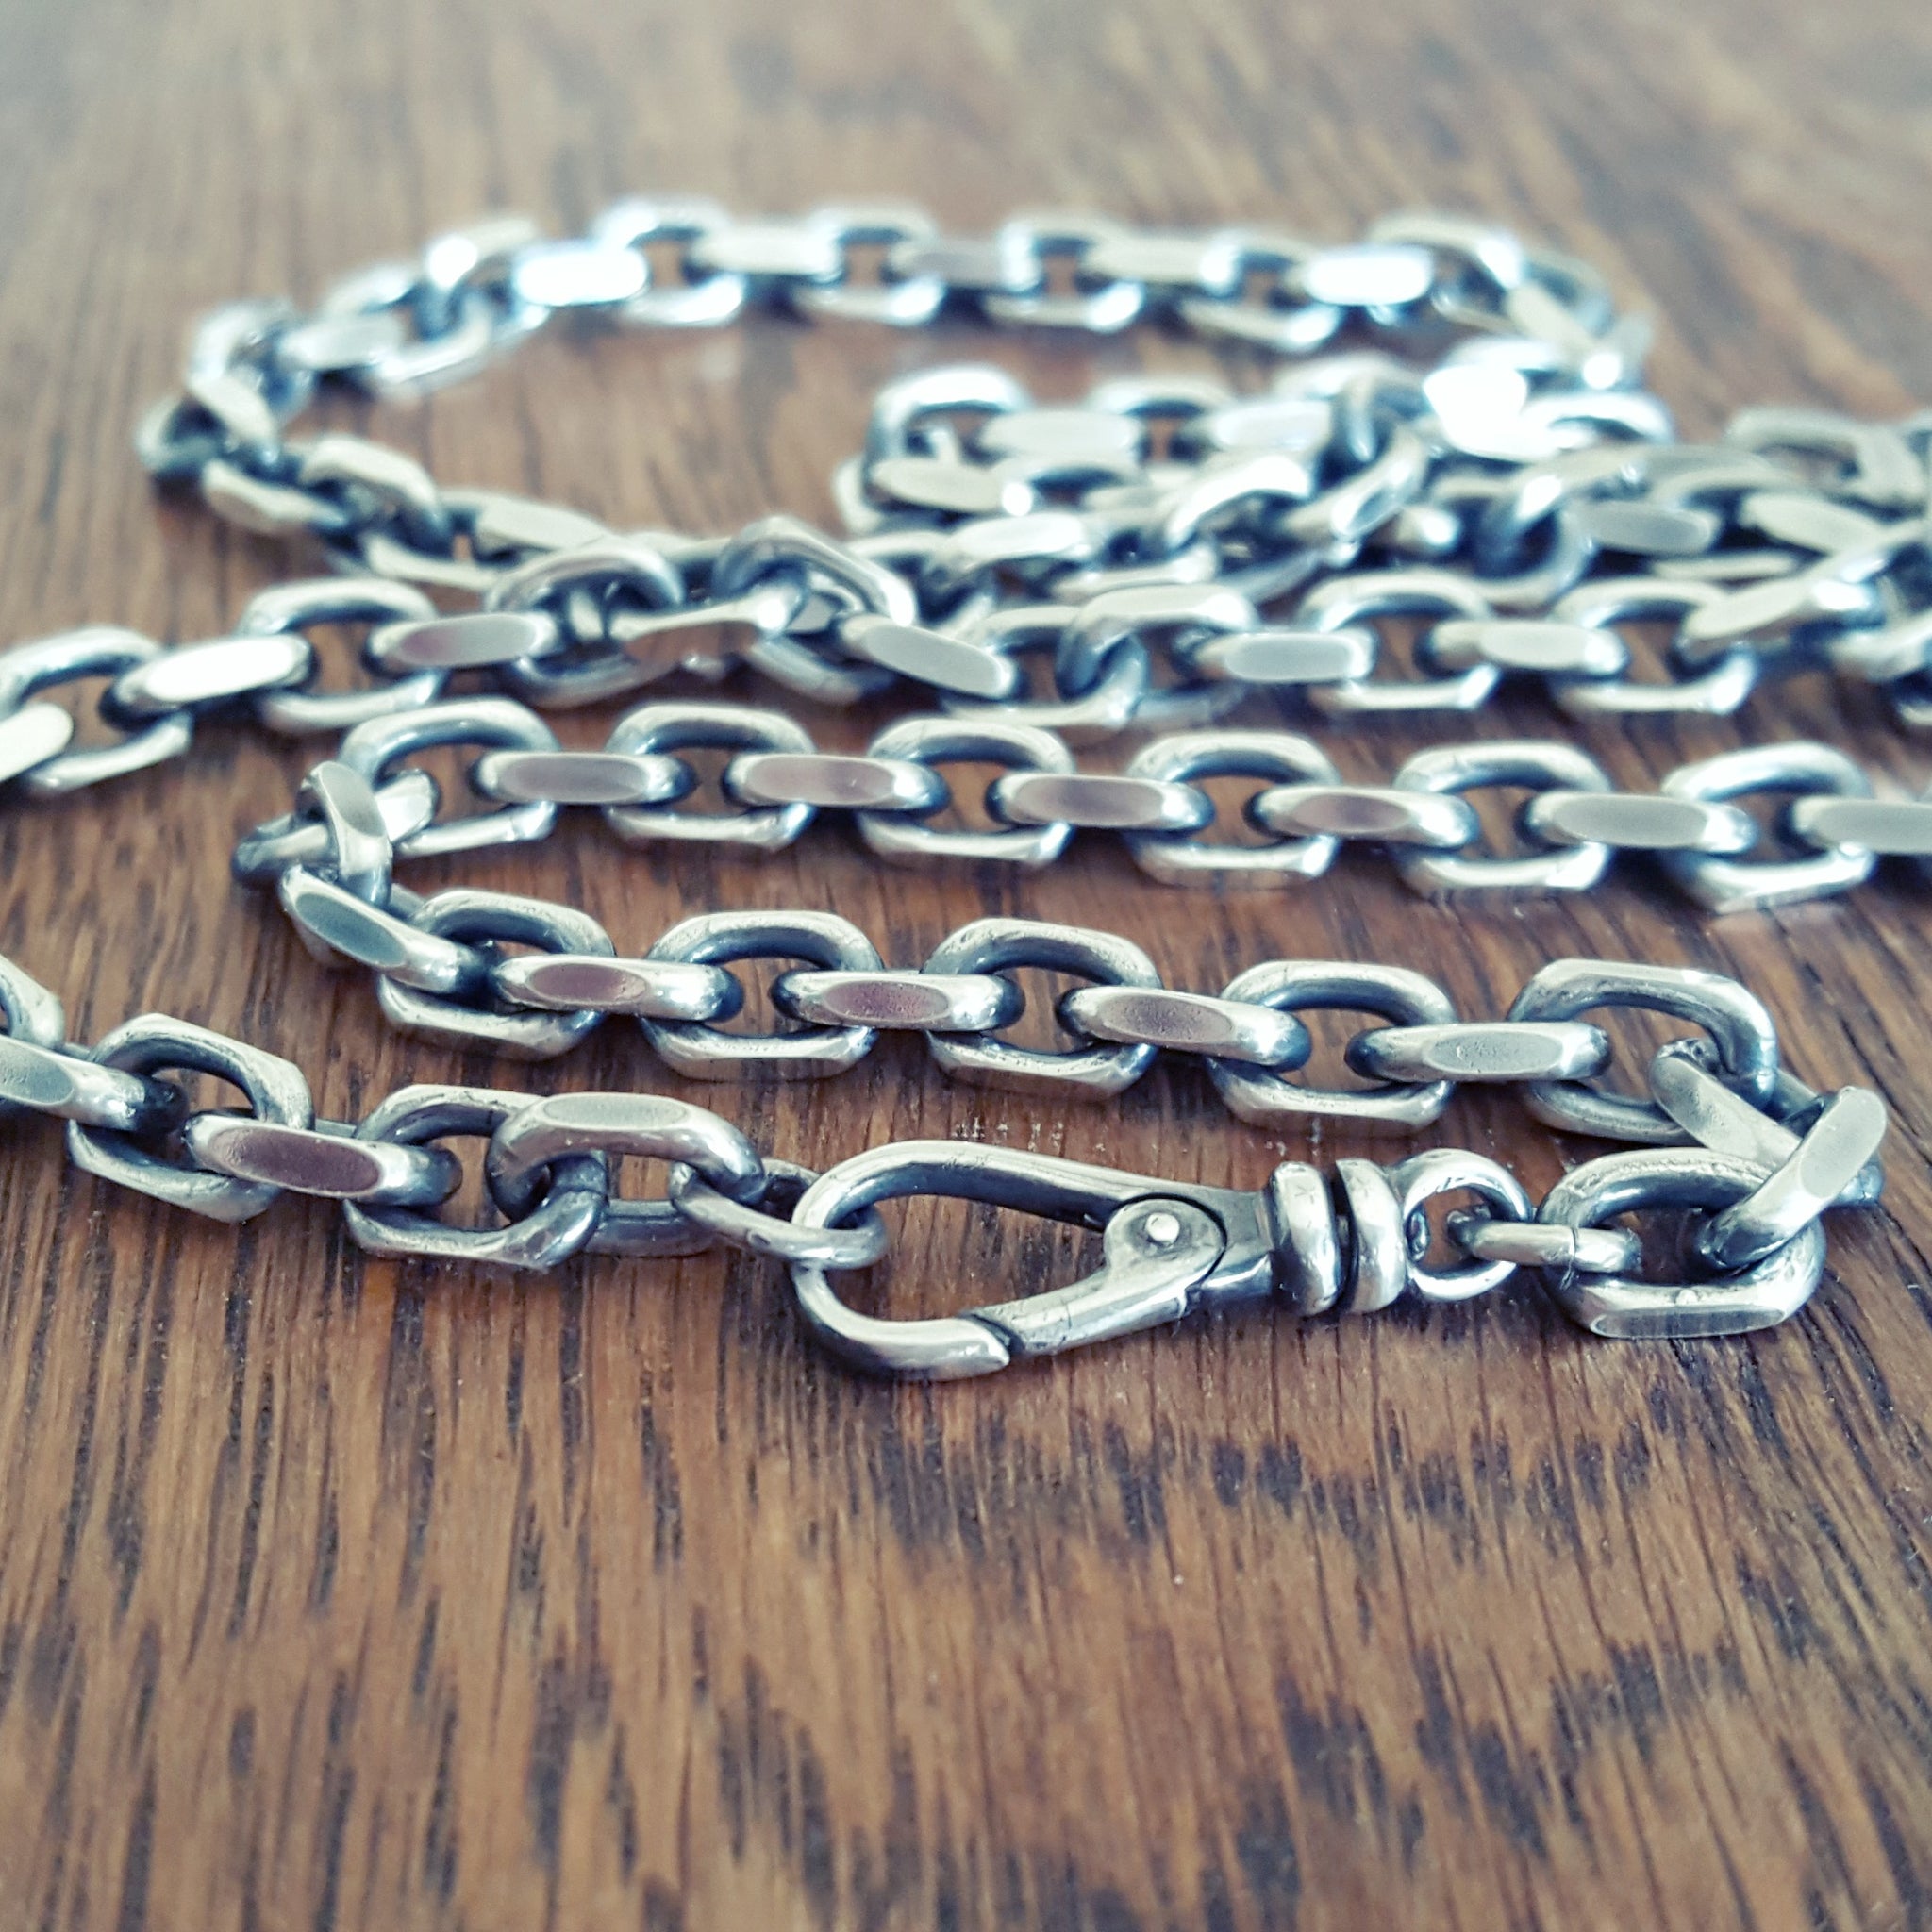 Men's Oxidized Chain, Thick 5.9mm Diamond Cut Oval Cable Necklace